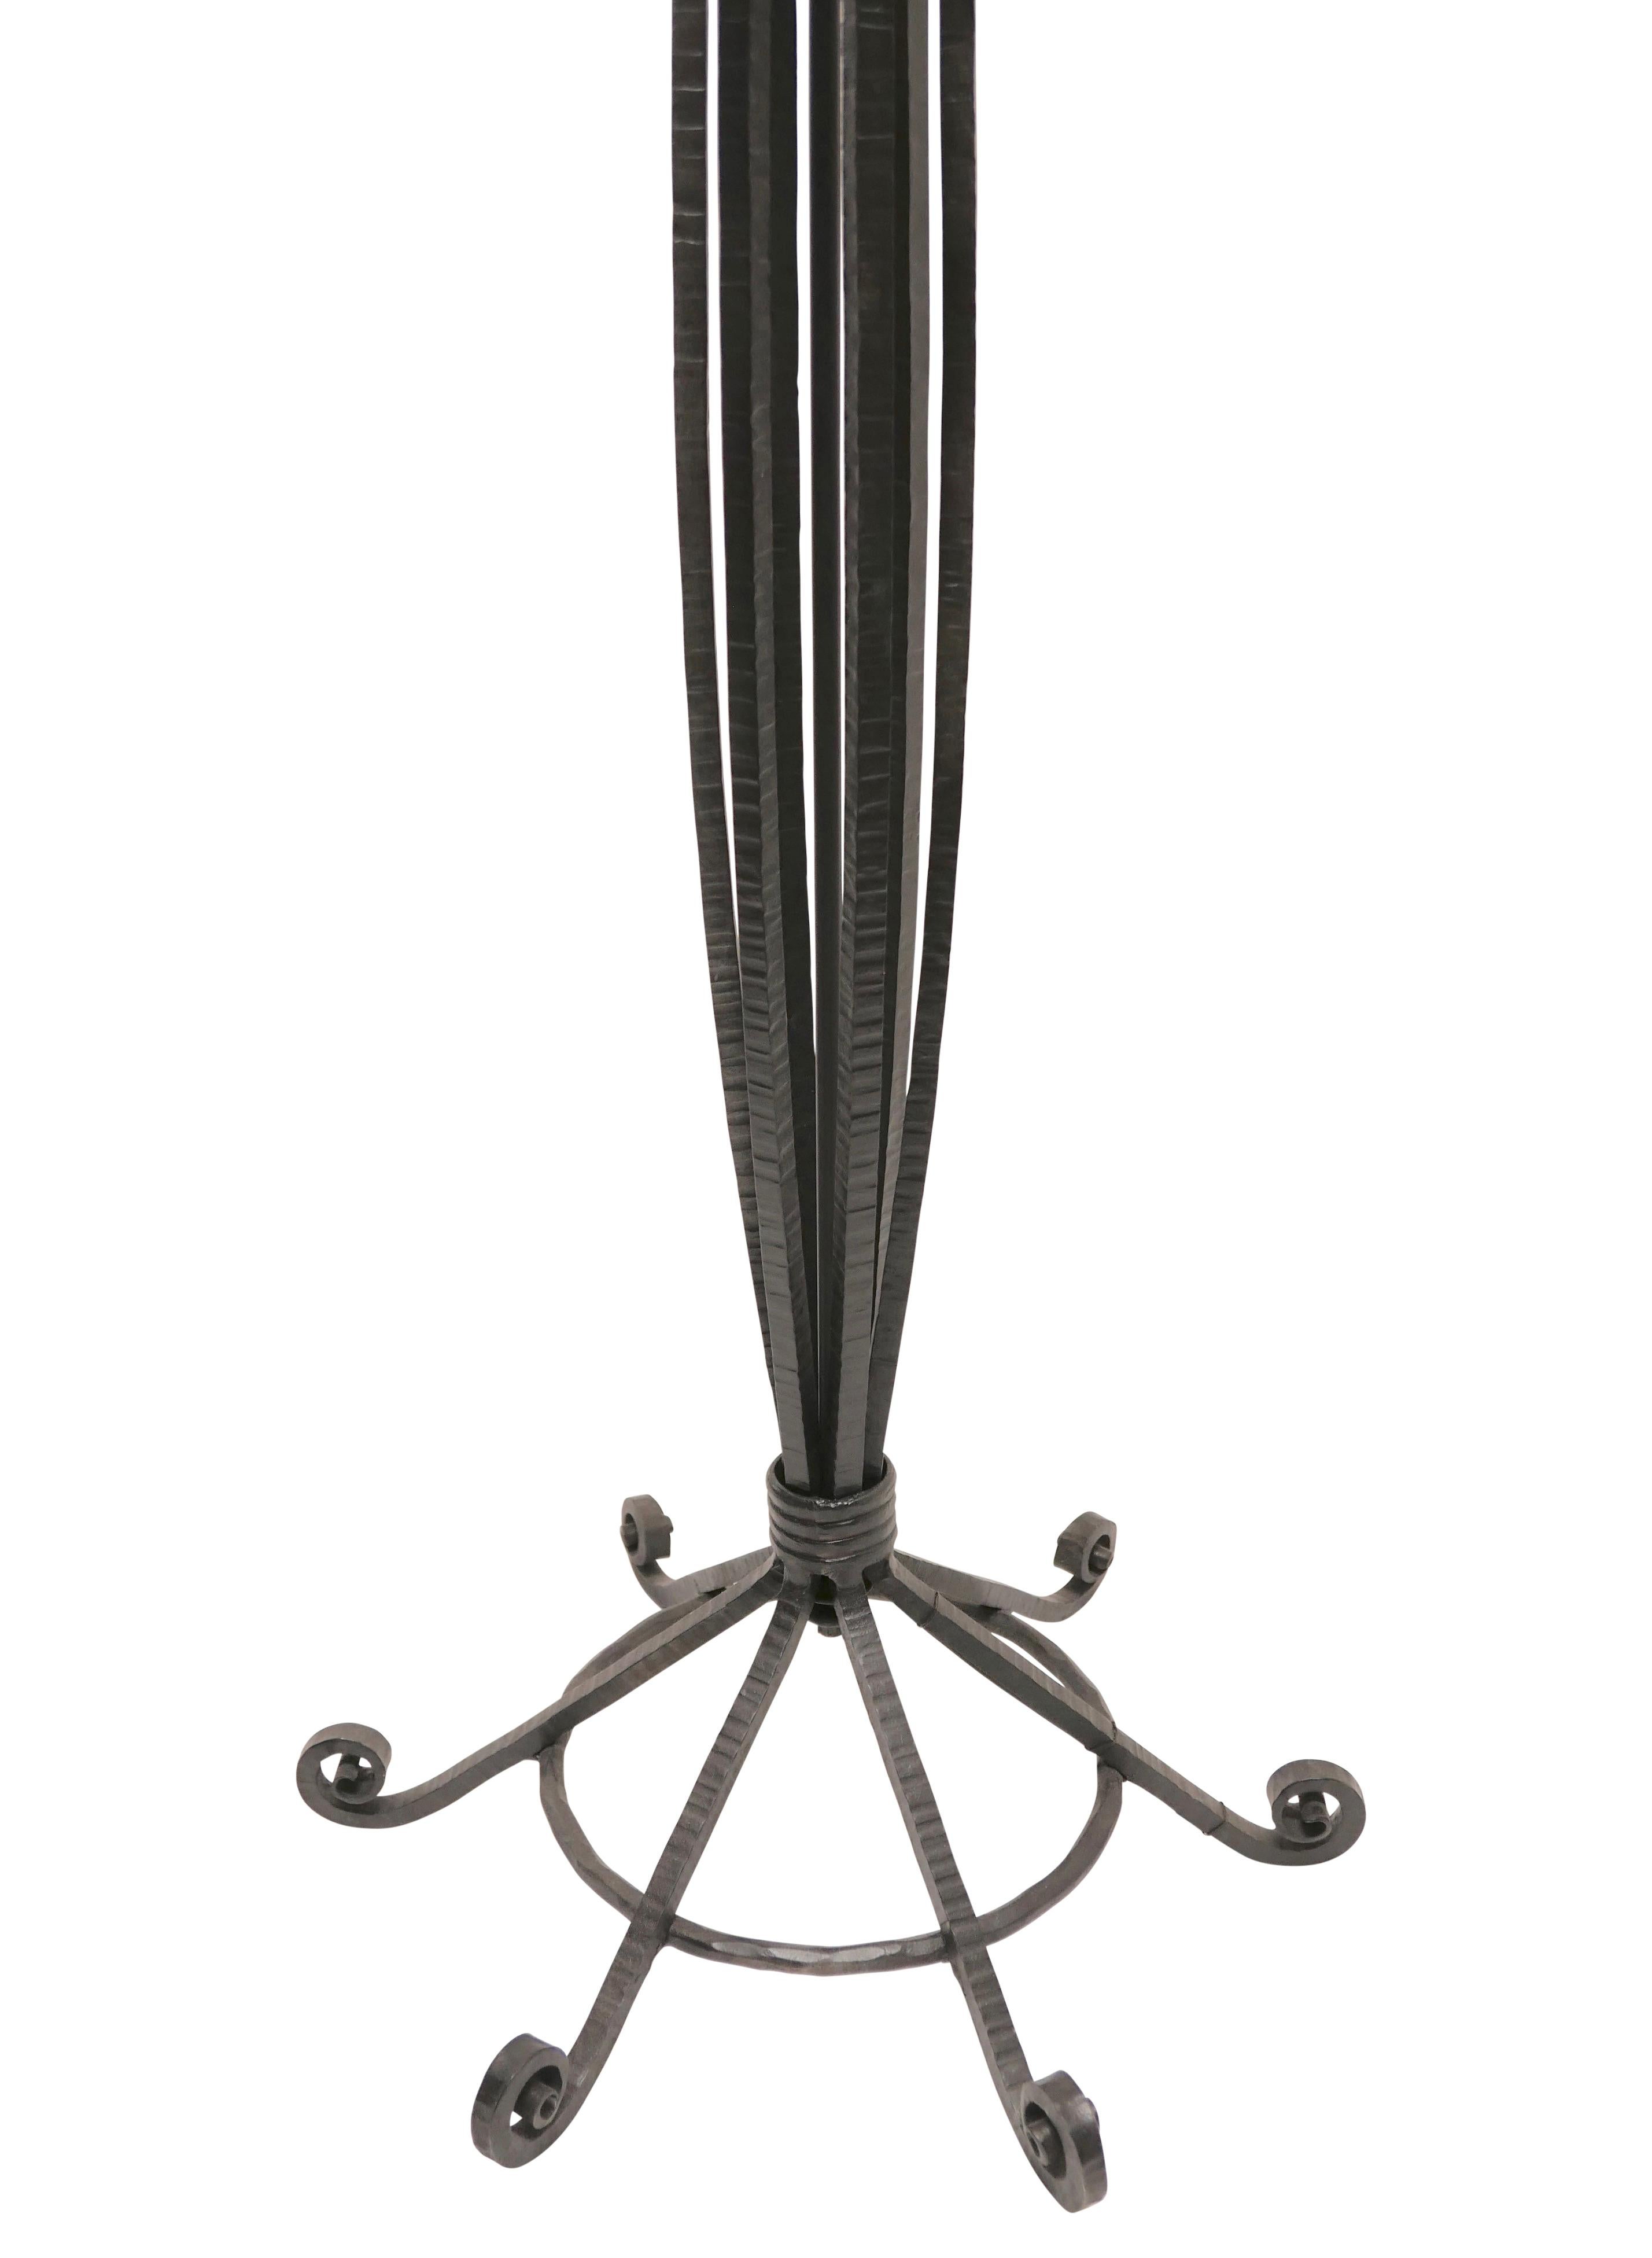 Art Deco Wrought Iron Floor Lamp with Alabaster Shade, French, circa 1920 For Sale 3